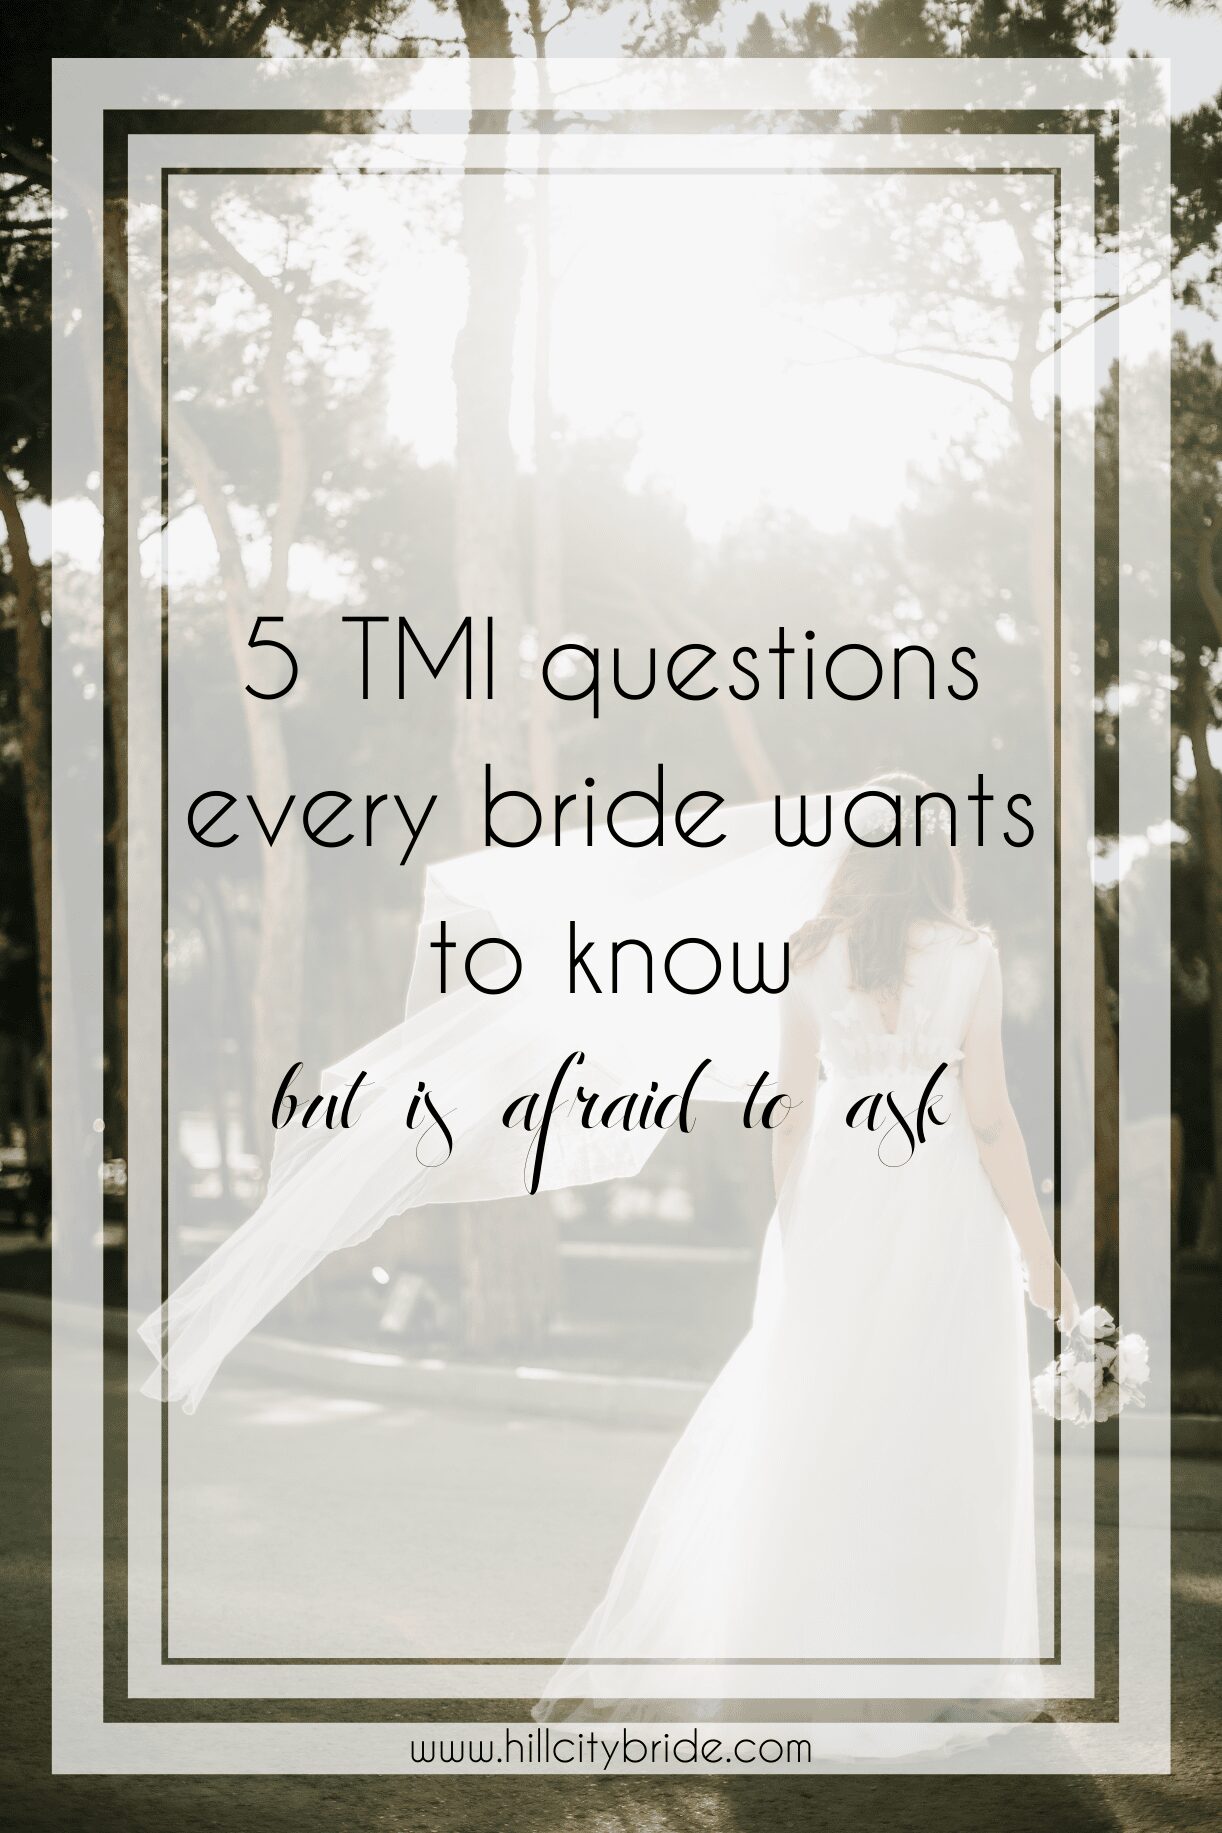 5 Fascinating TMI Questions Every Bride Wants to Know but Won’t Ask